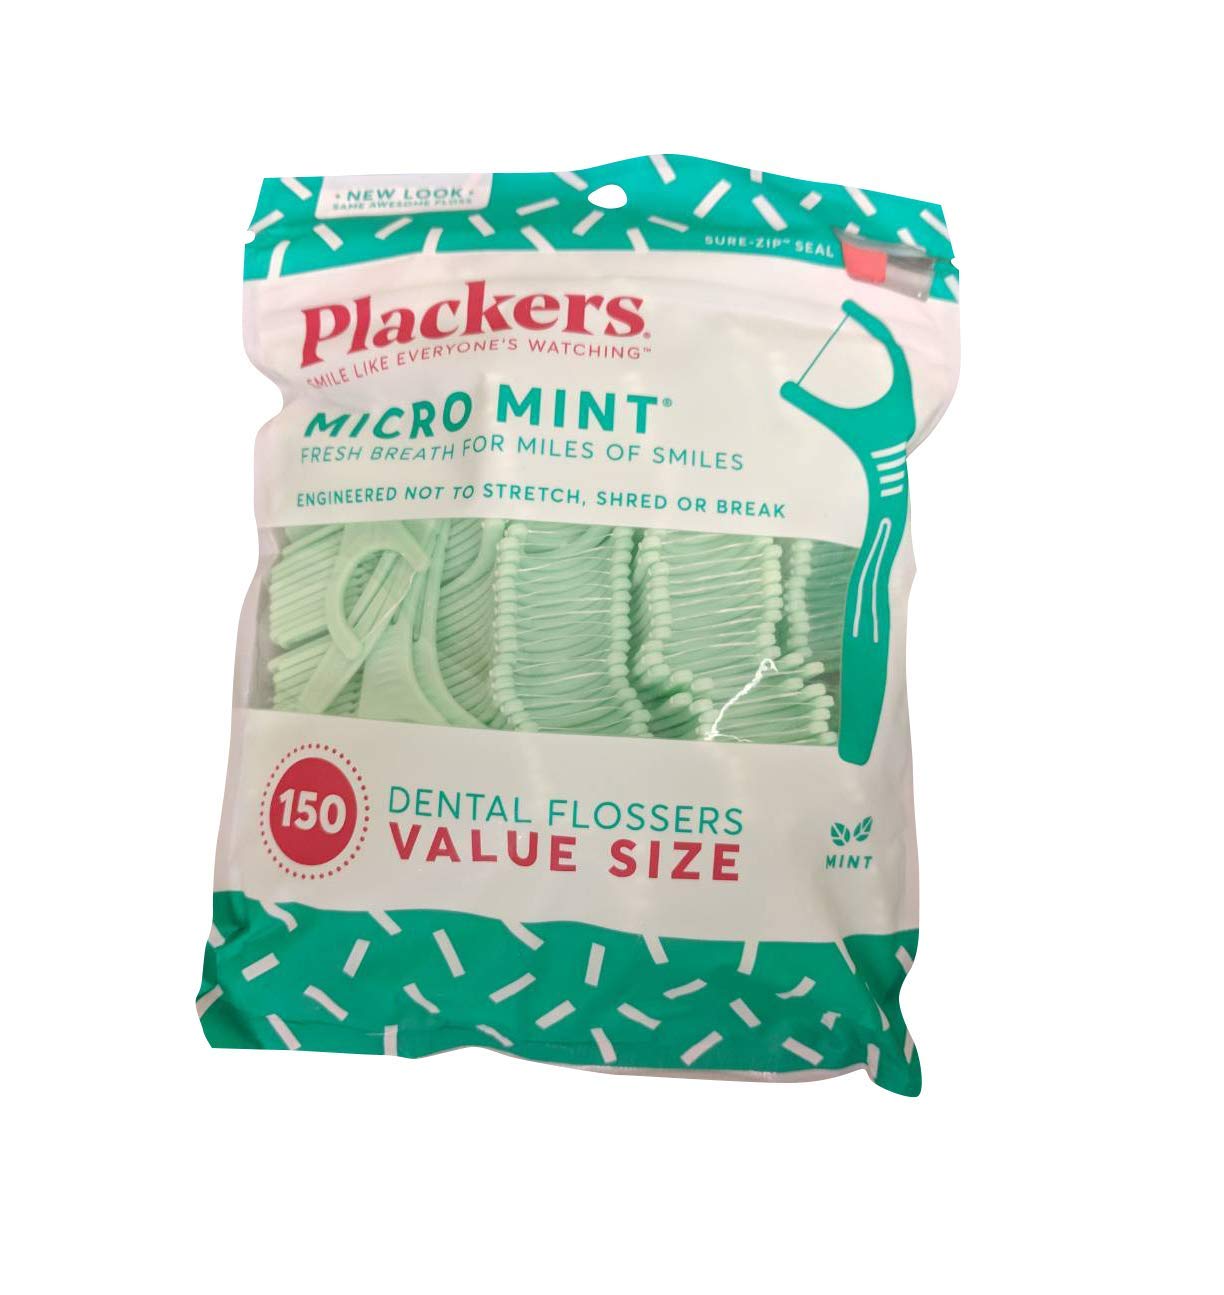 Plackers Micro Mint Dental Flossers, 150 Count